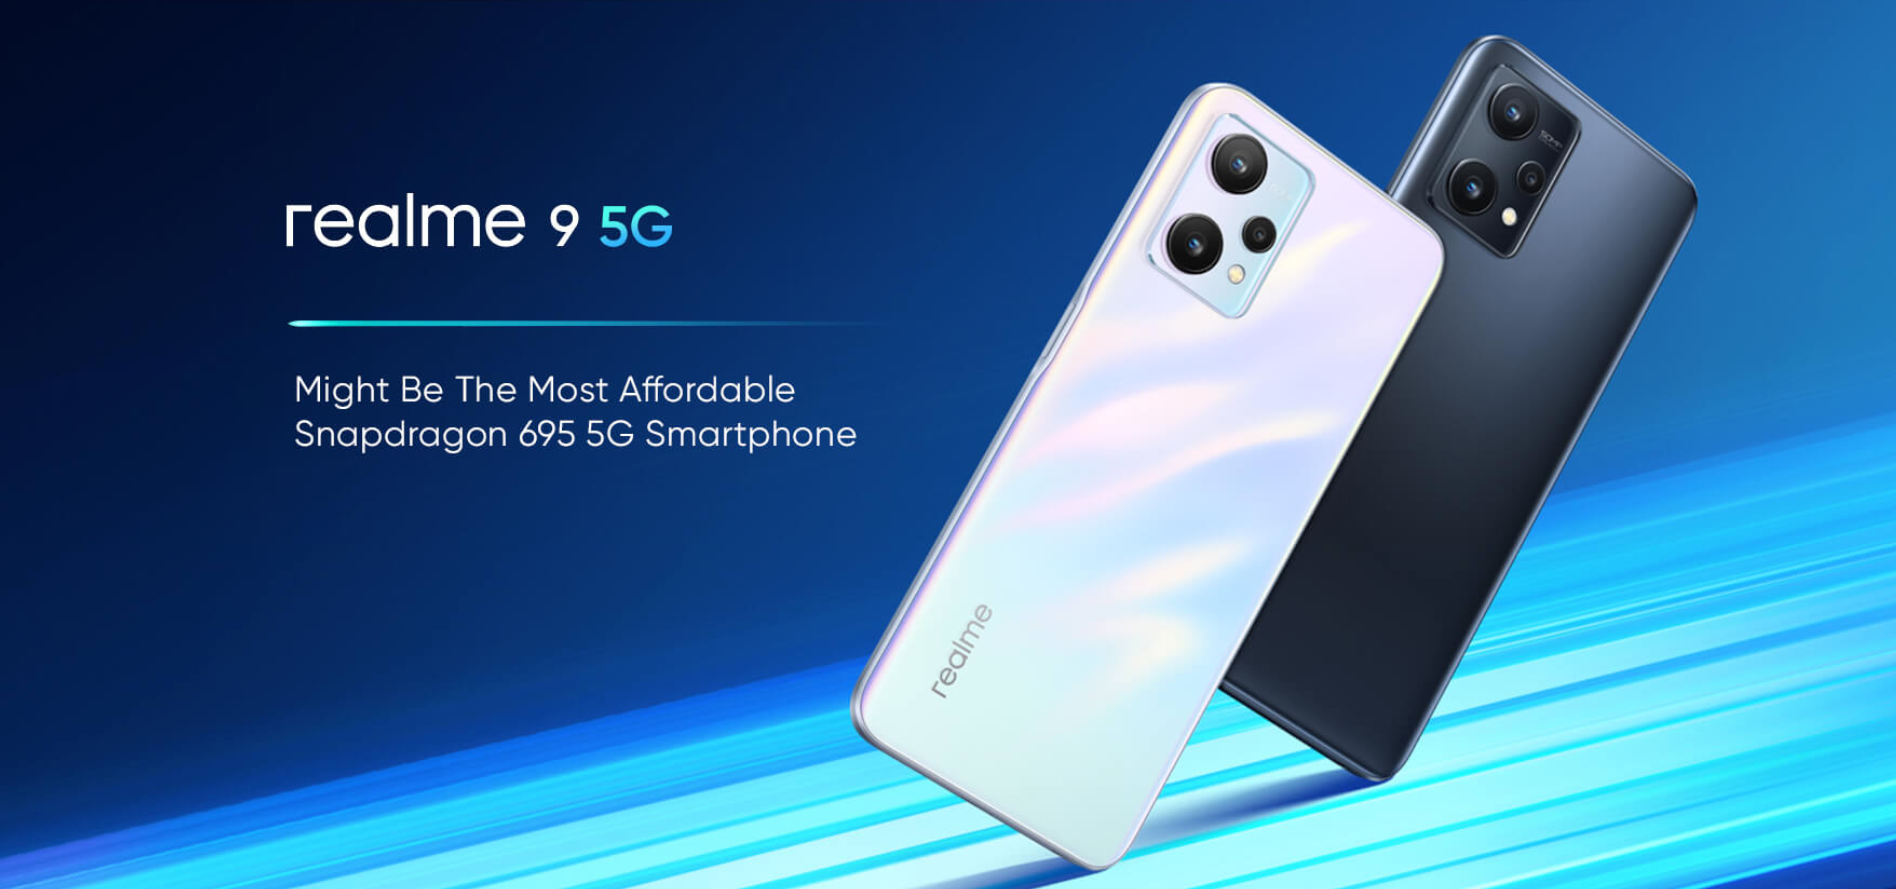 Realme’s Pad Mini is coming to Europe with the 9 and recent 9 5G in tow